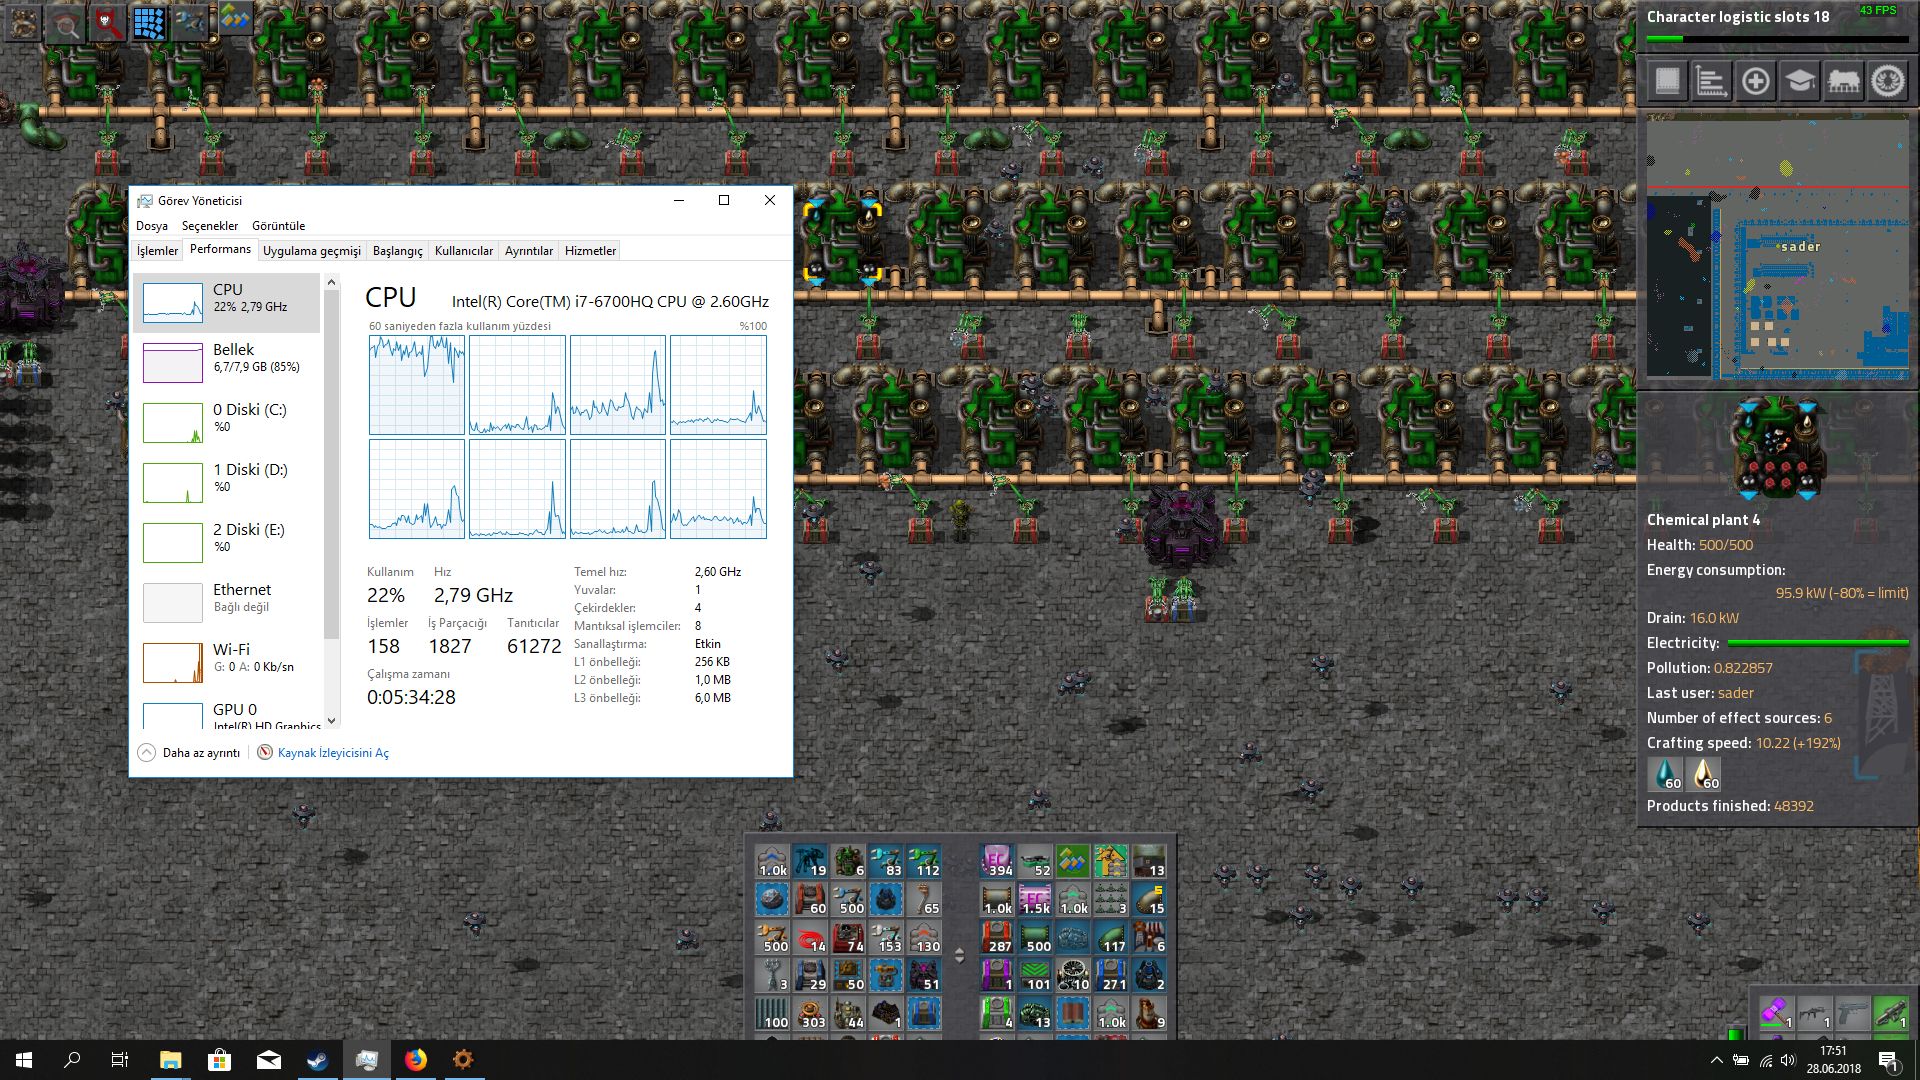 as you can see cpu doesnt past 2.8ghz but it can go as much as 3.1 ghz